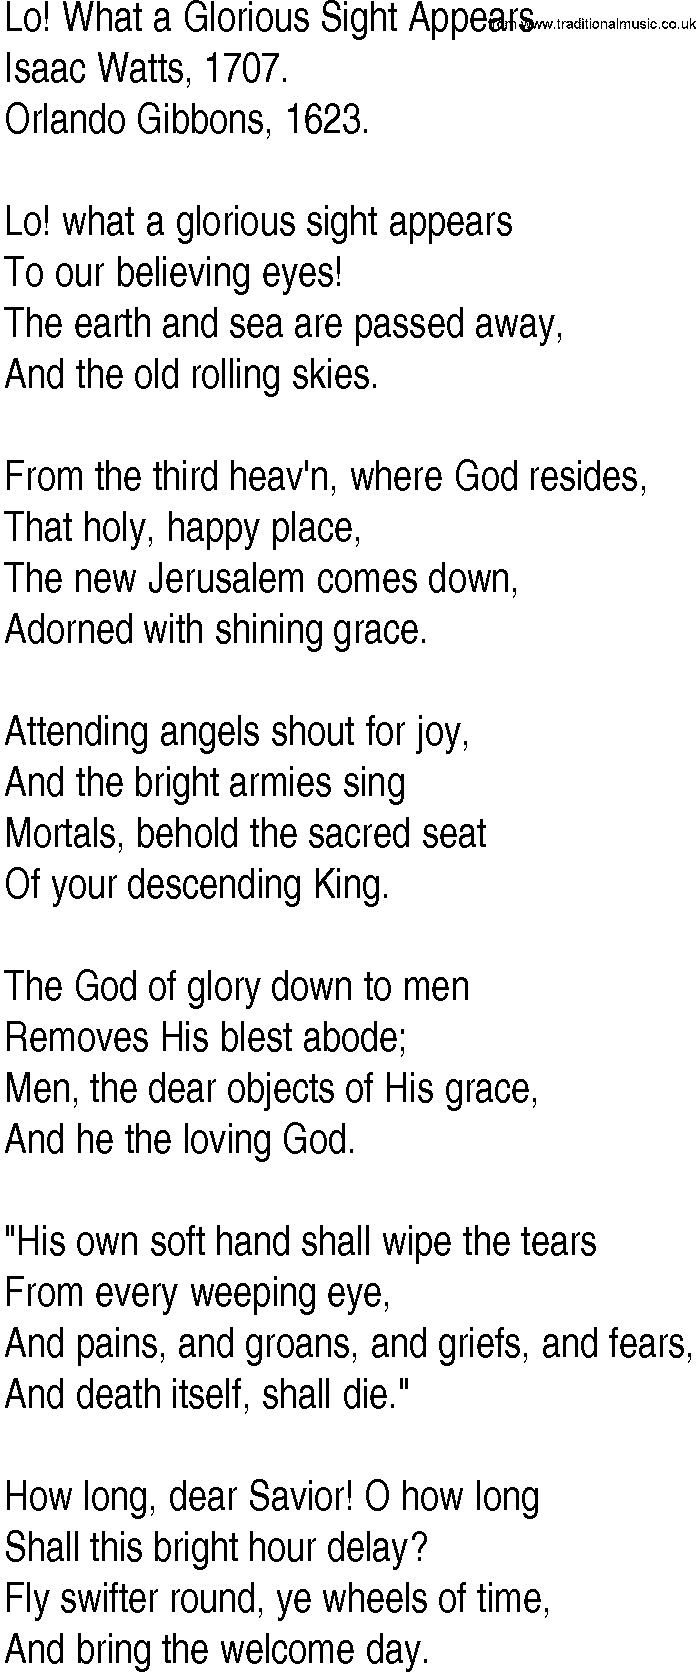 Hymn and Gospel Song: Lo! What a Glorious Sight Appears by Isaac Watts lyrics